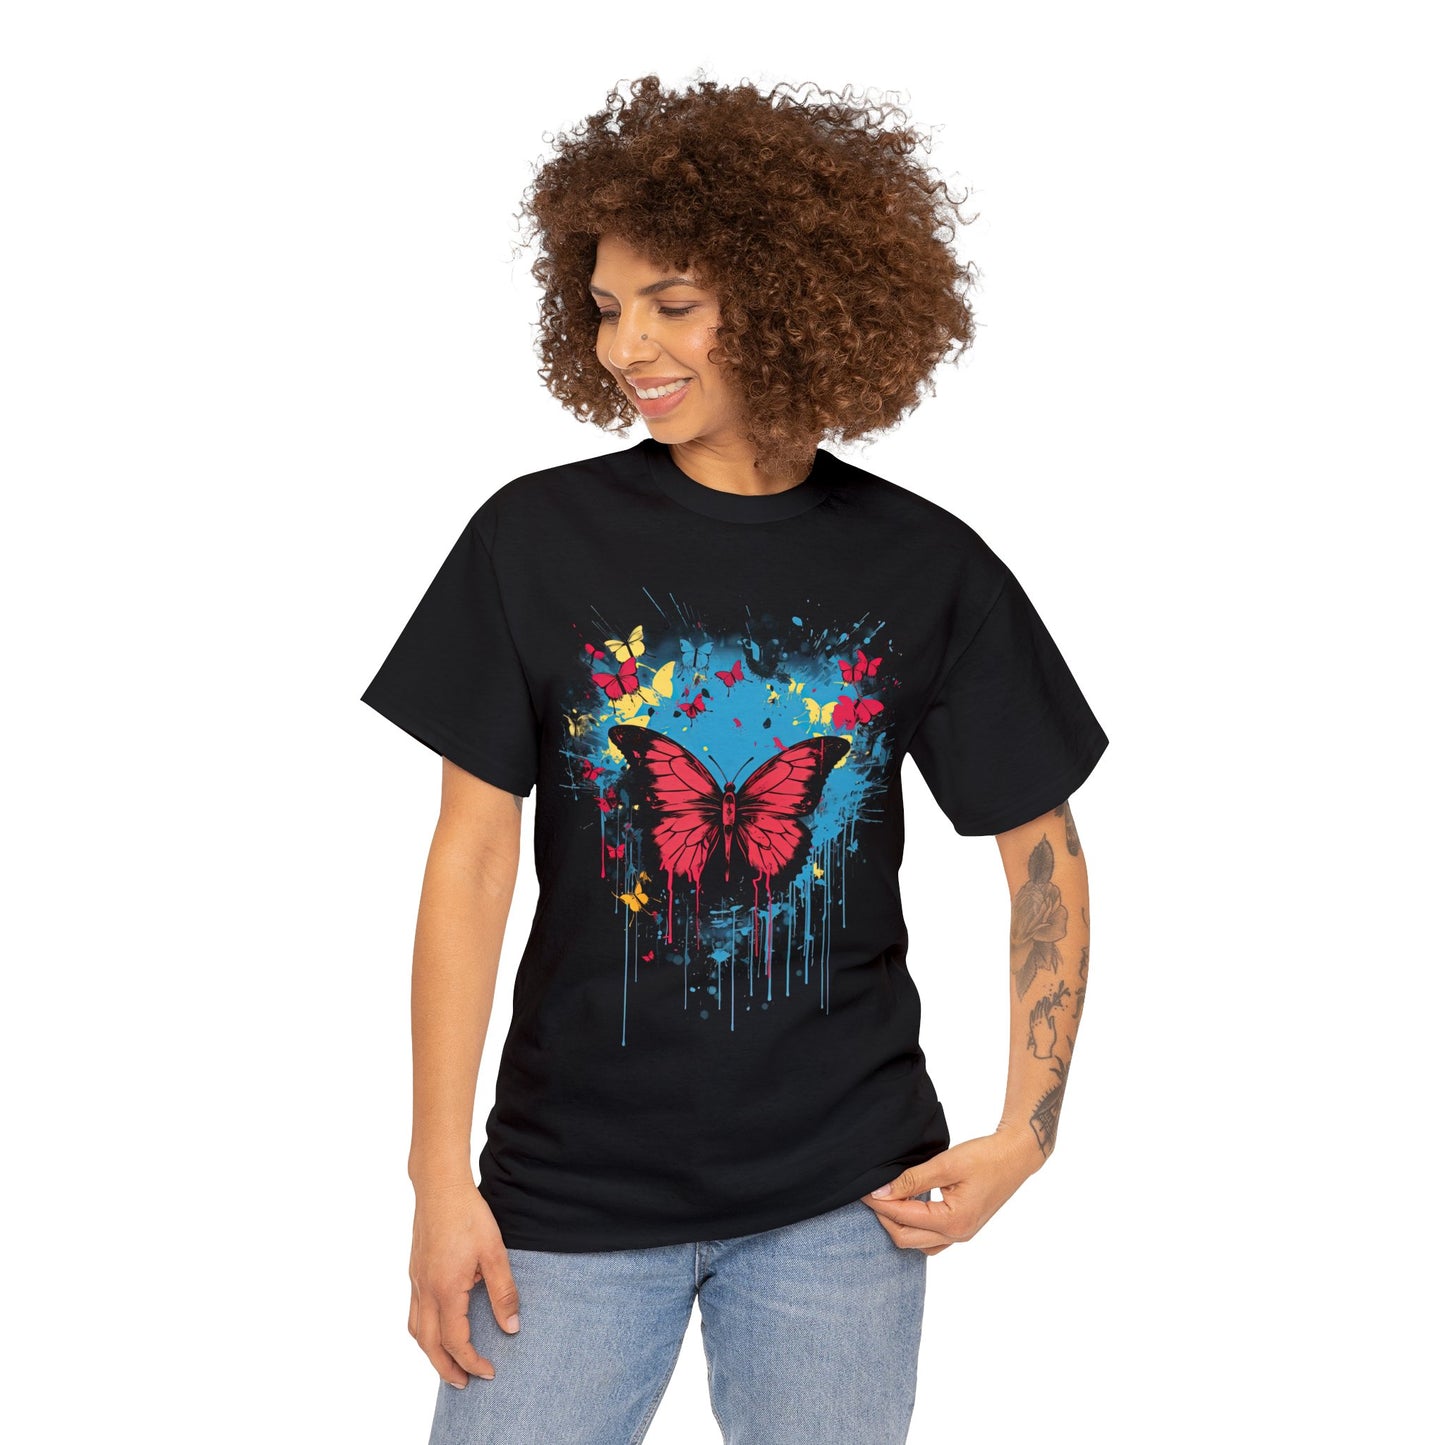 Butterfly Paint Colorful Graphic Design Tee